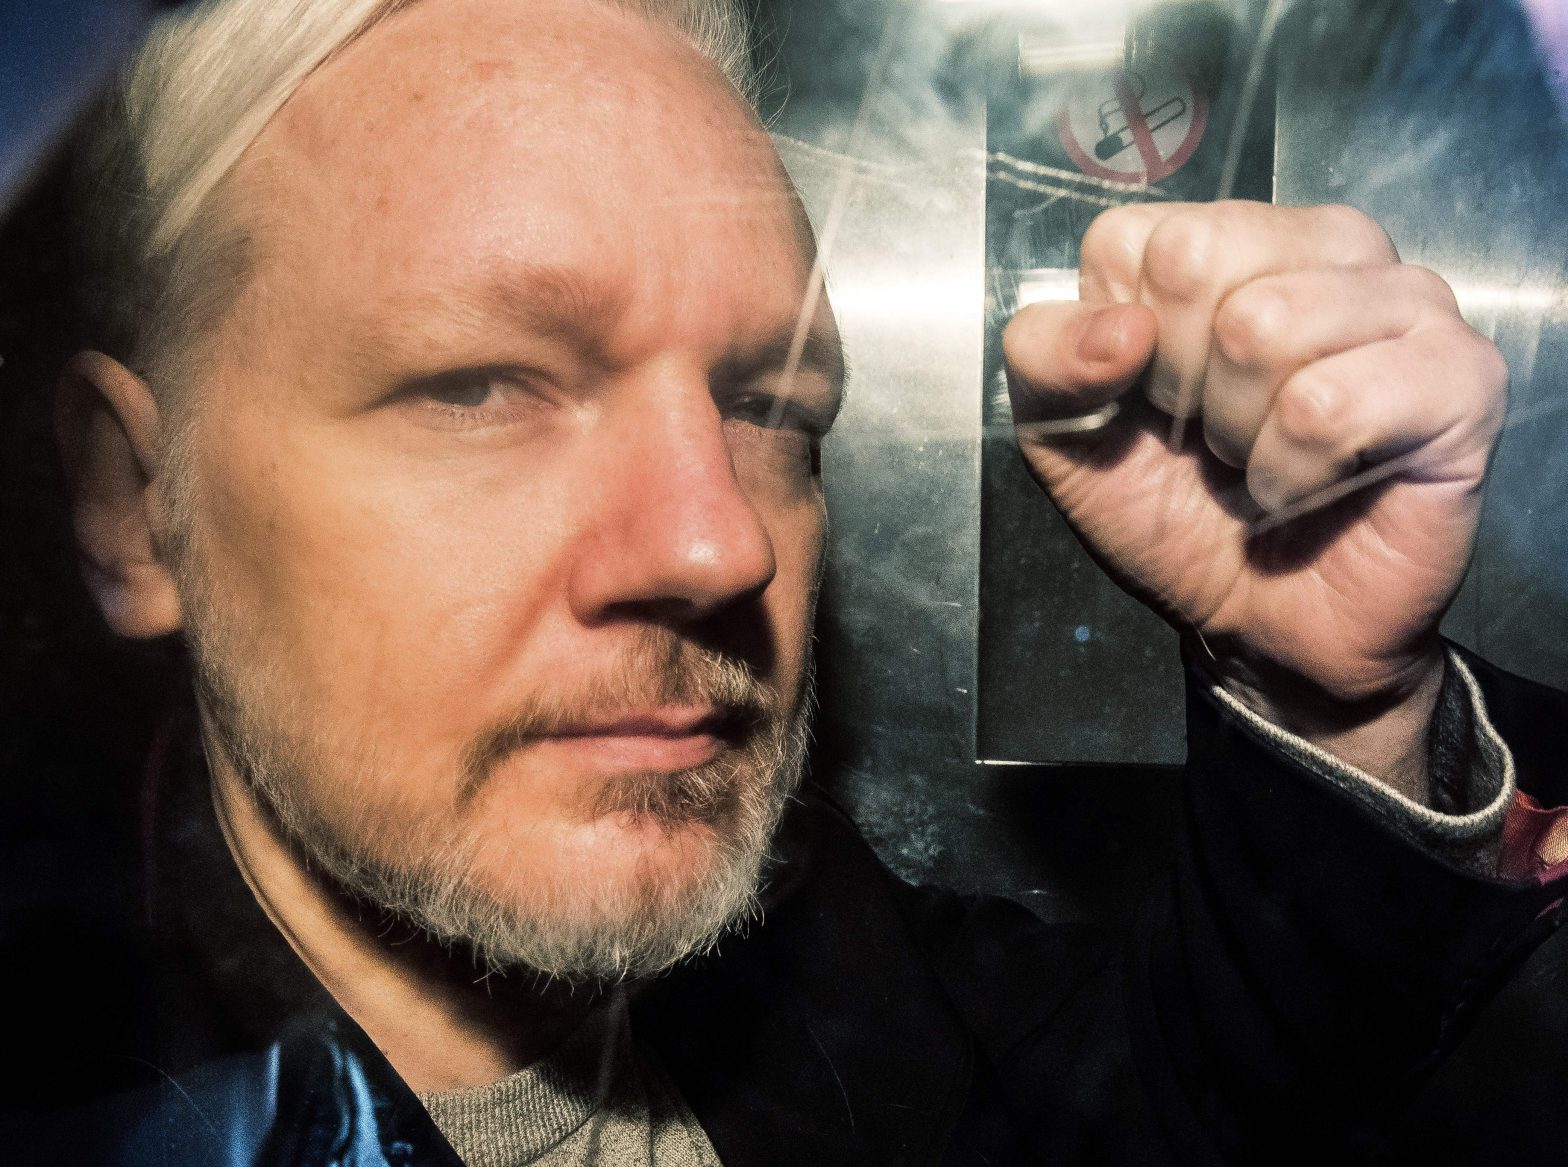 Assange Lawyers Say Trump Offered a Pardon If He ‘Played Ball’